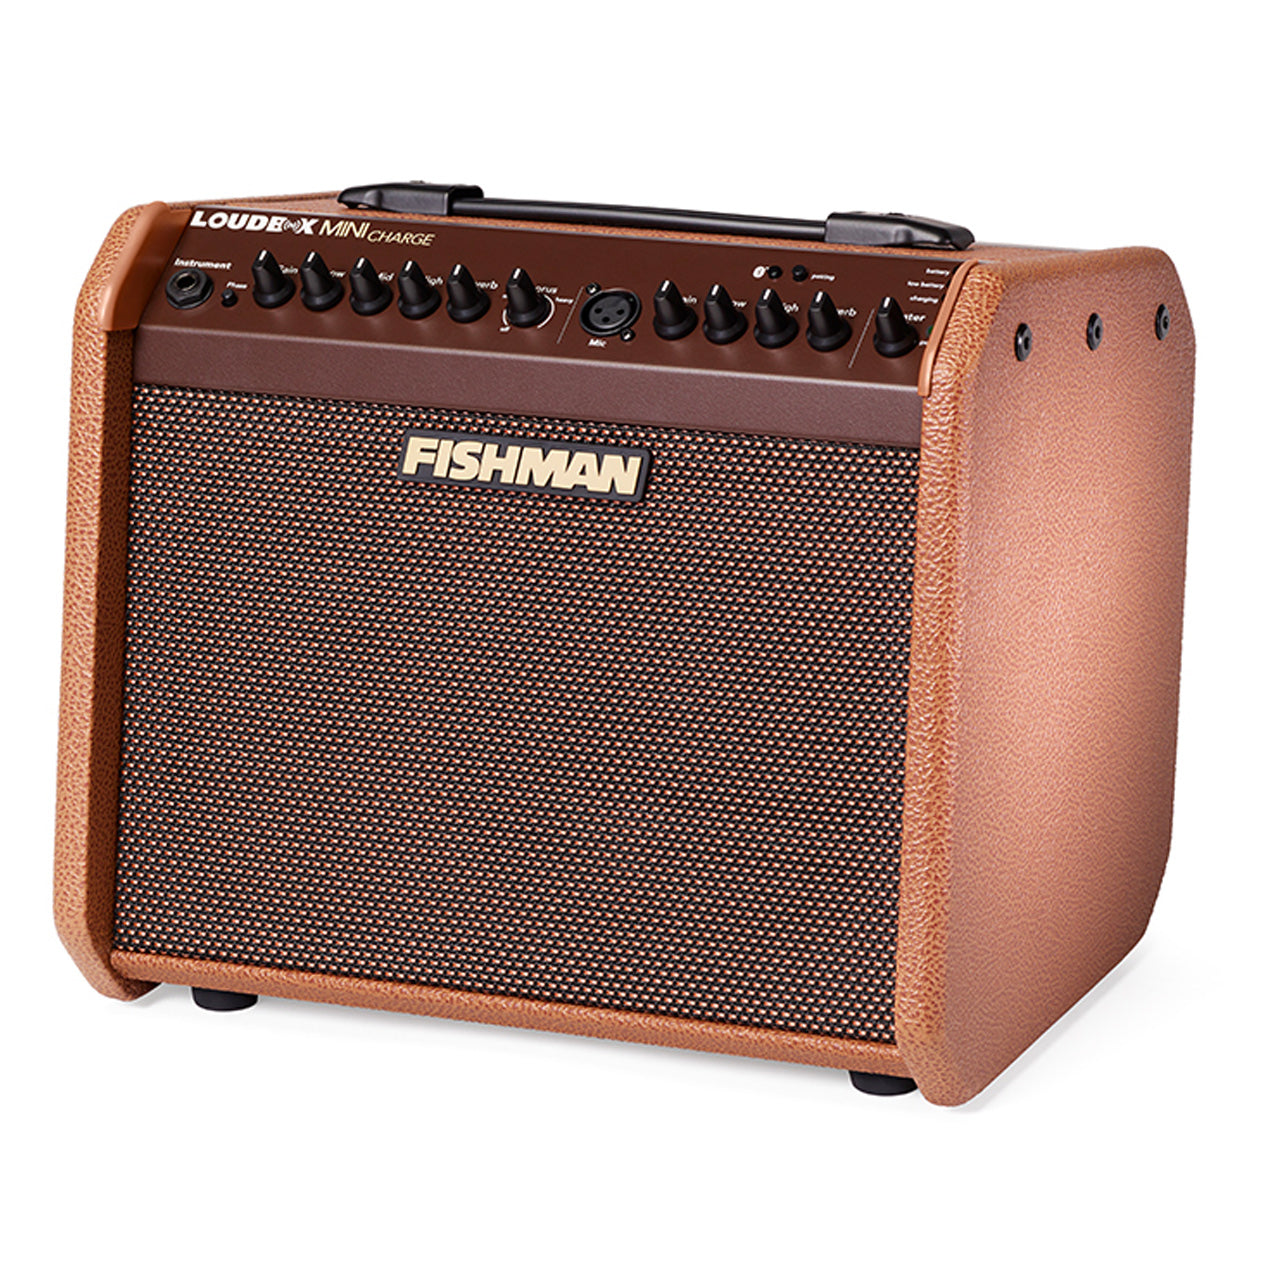 Fishman Loudbox Mini Charge Battery-Powered Acoustic Instrument Amplifier, angle 1